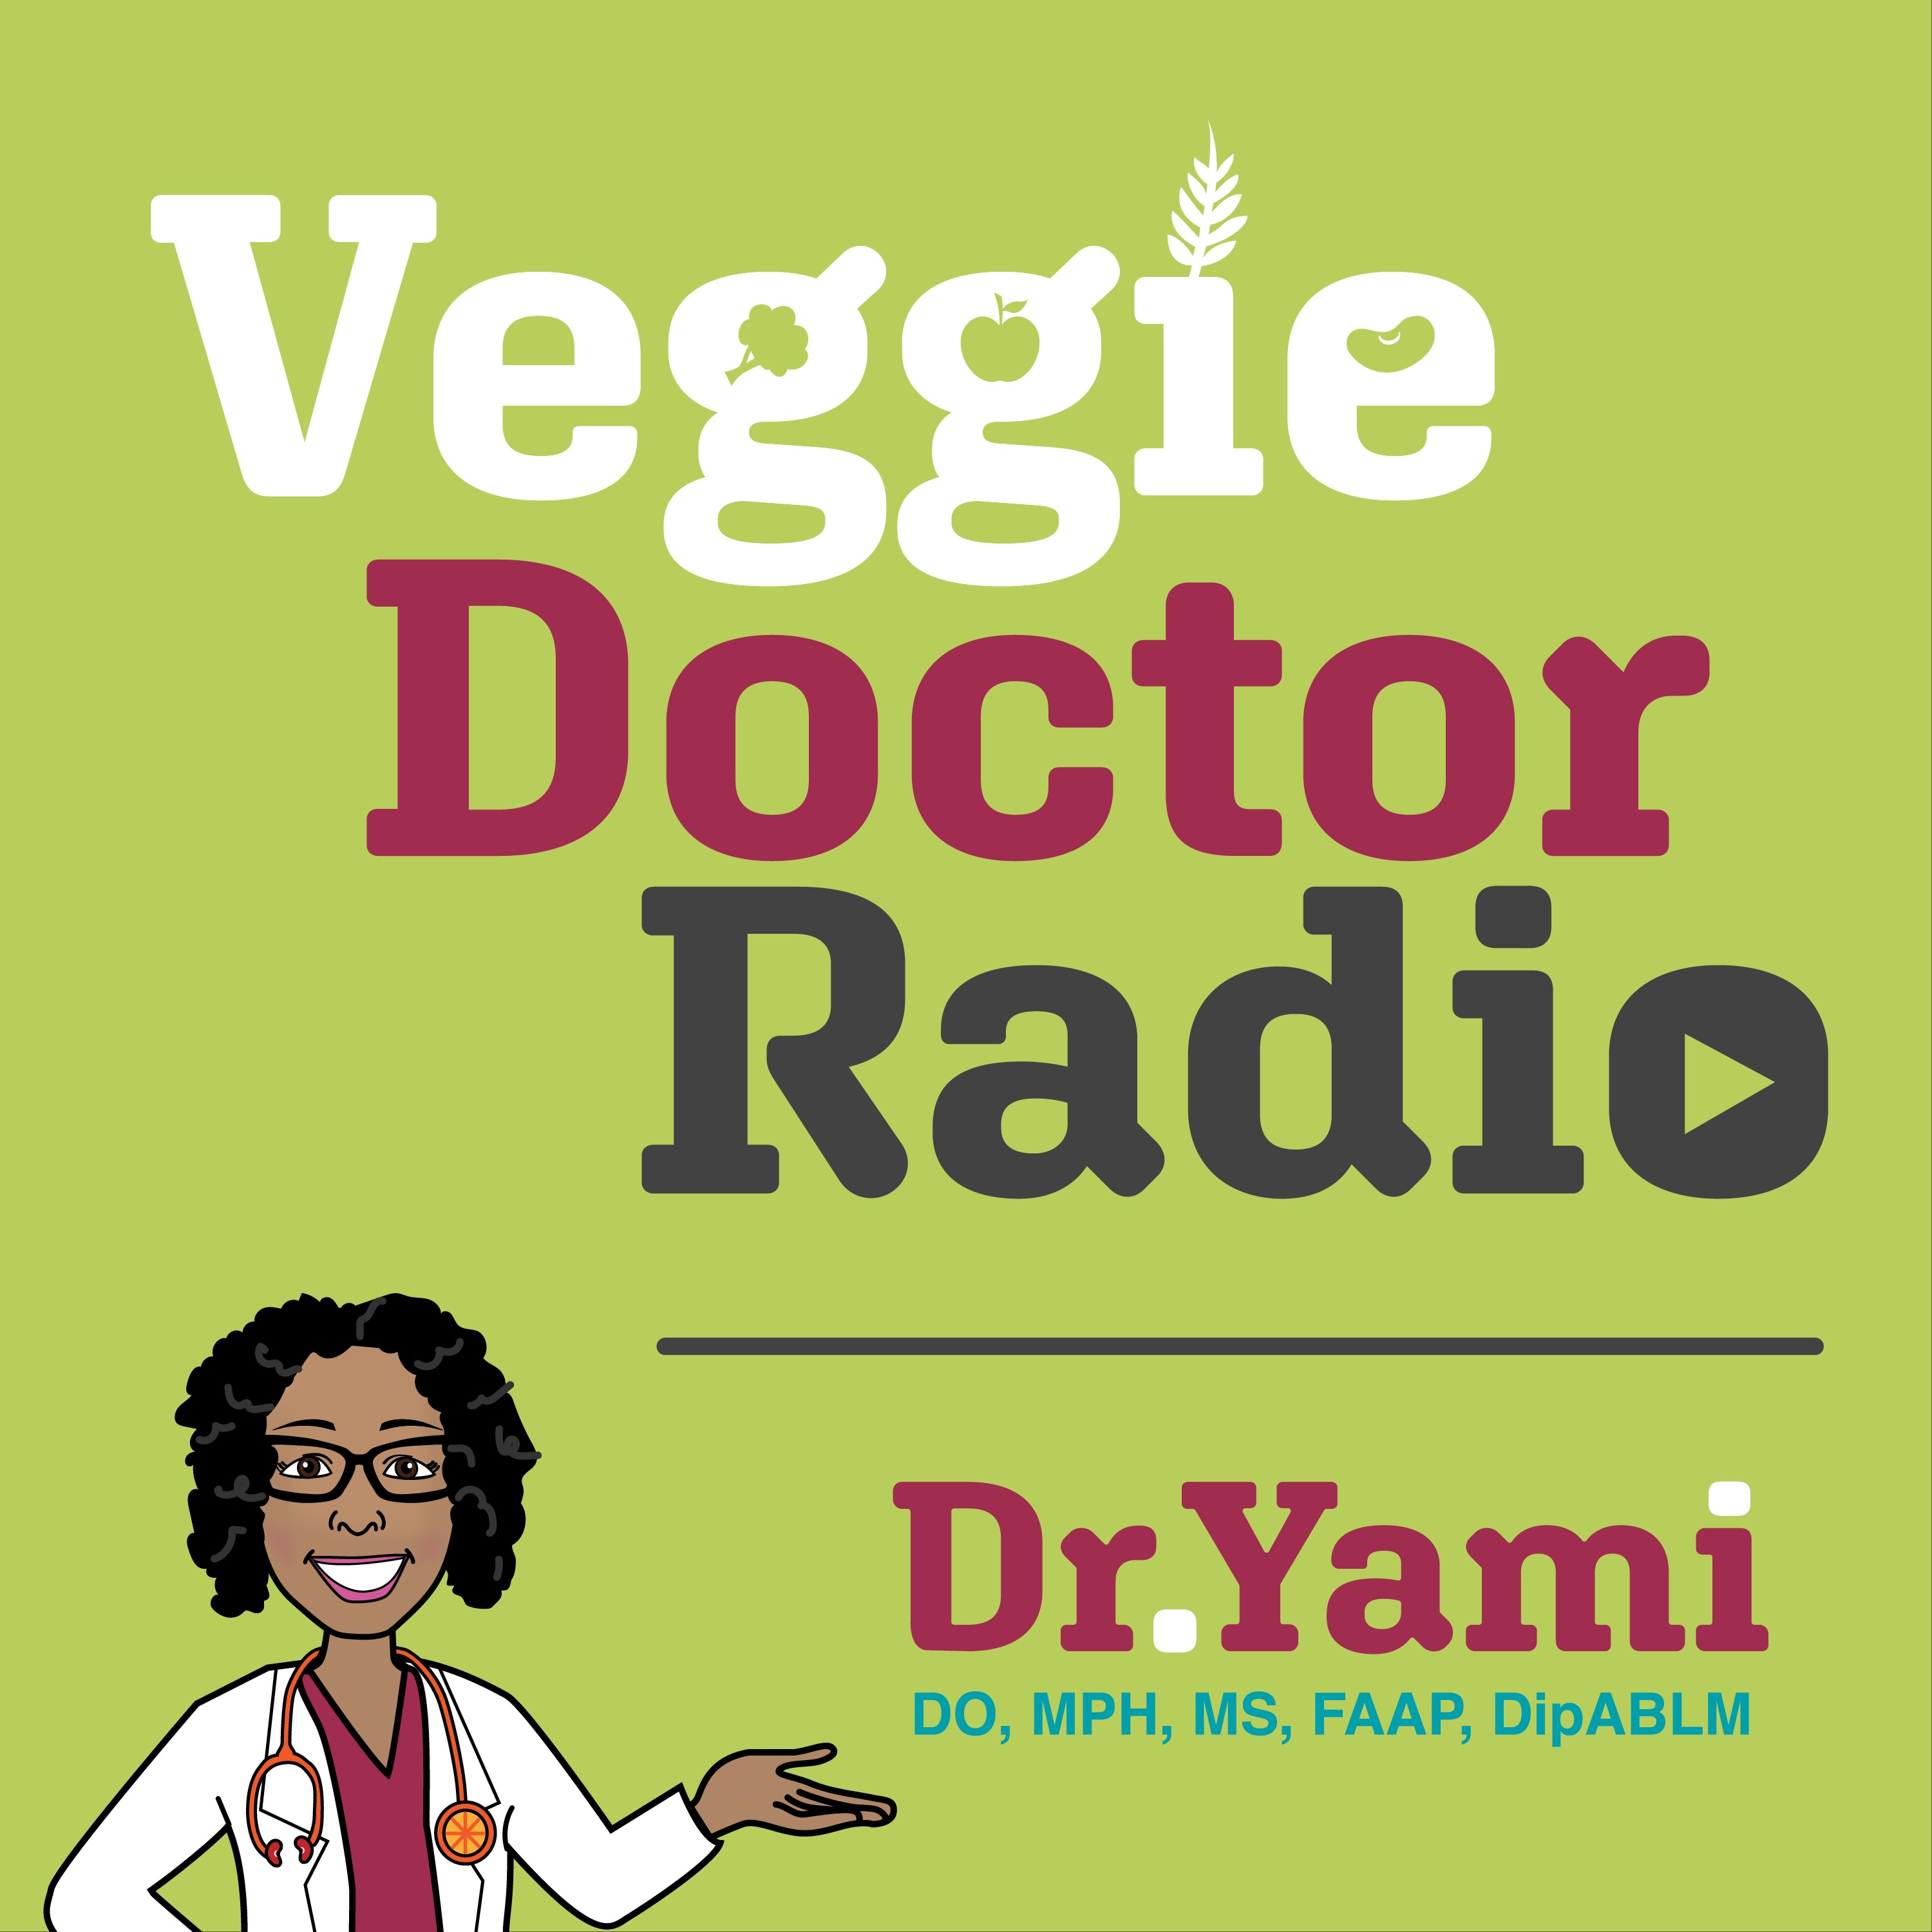 216: Flexibility for achieving consistency in your Joy Choice with Dr. Michelle Segar (Veggie Doctor Radio)